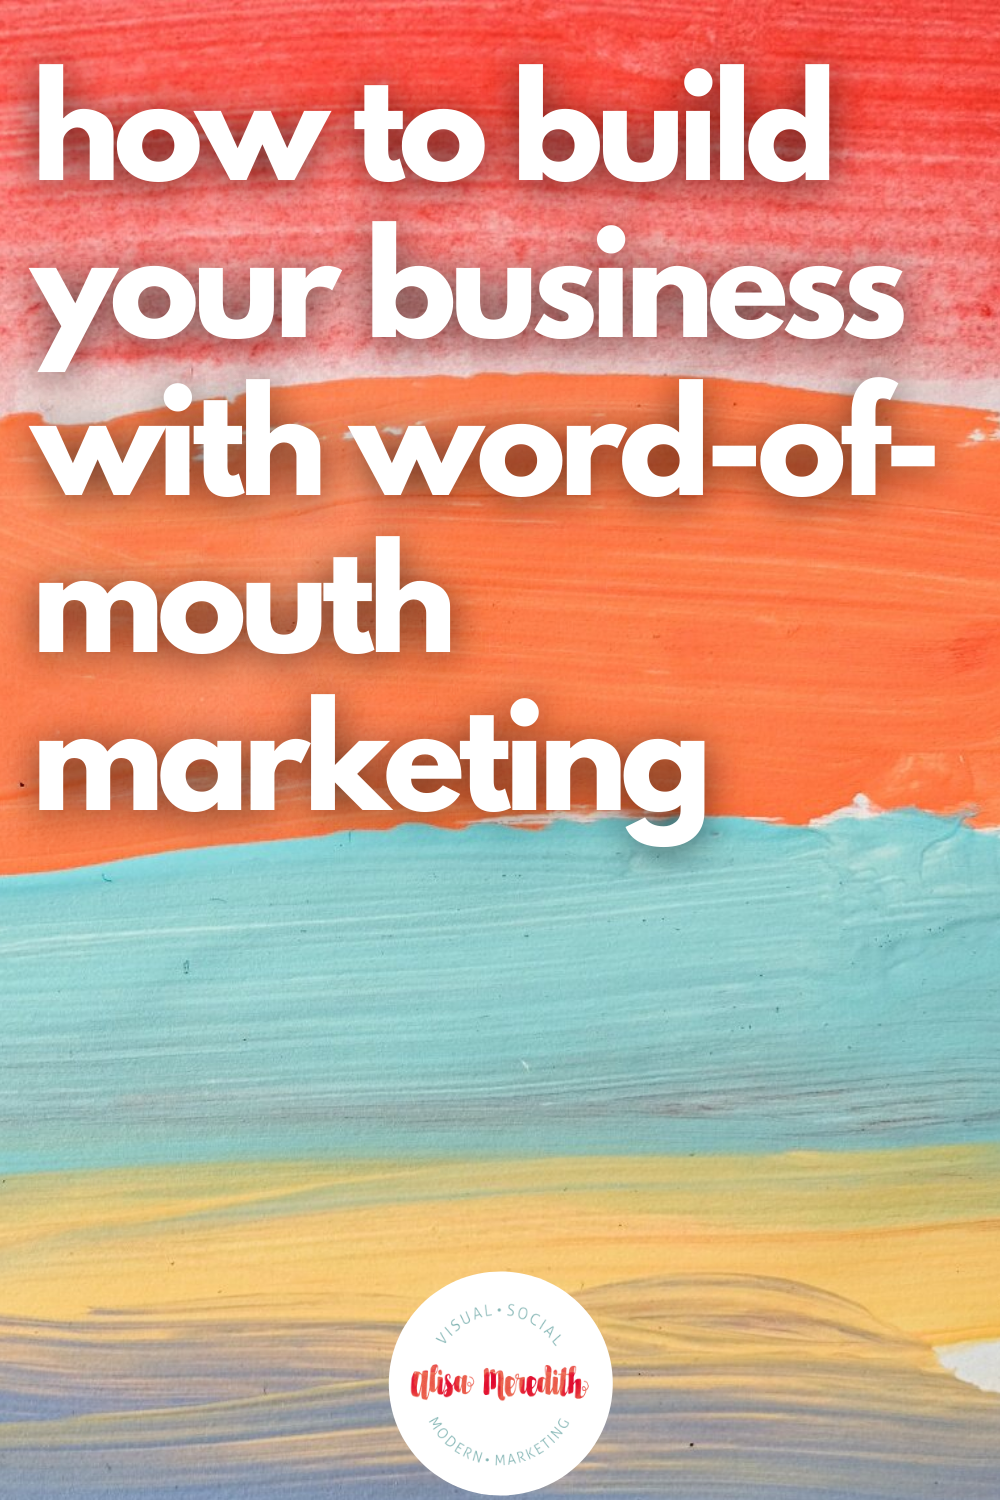 how to build your business with word-of-mouth marketing